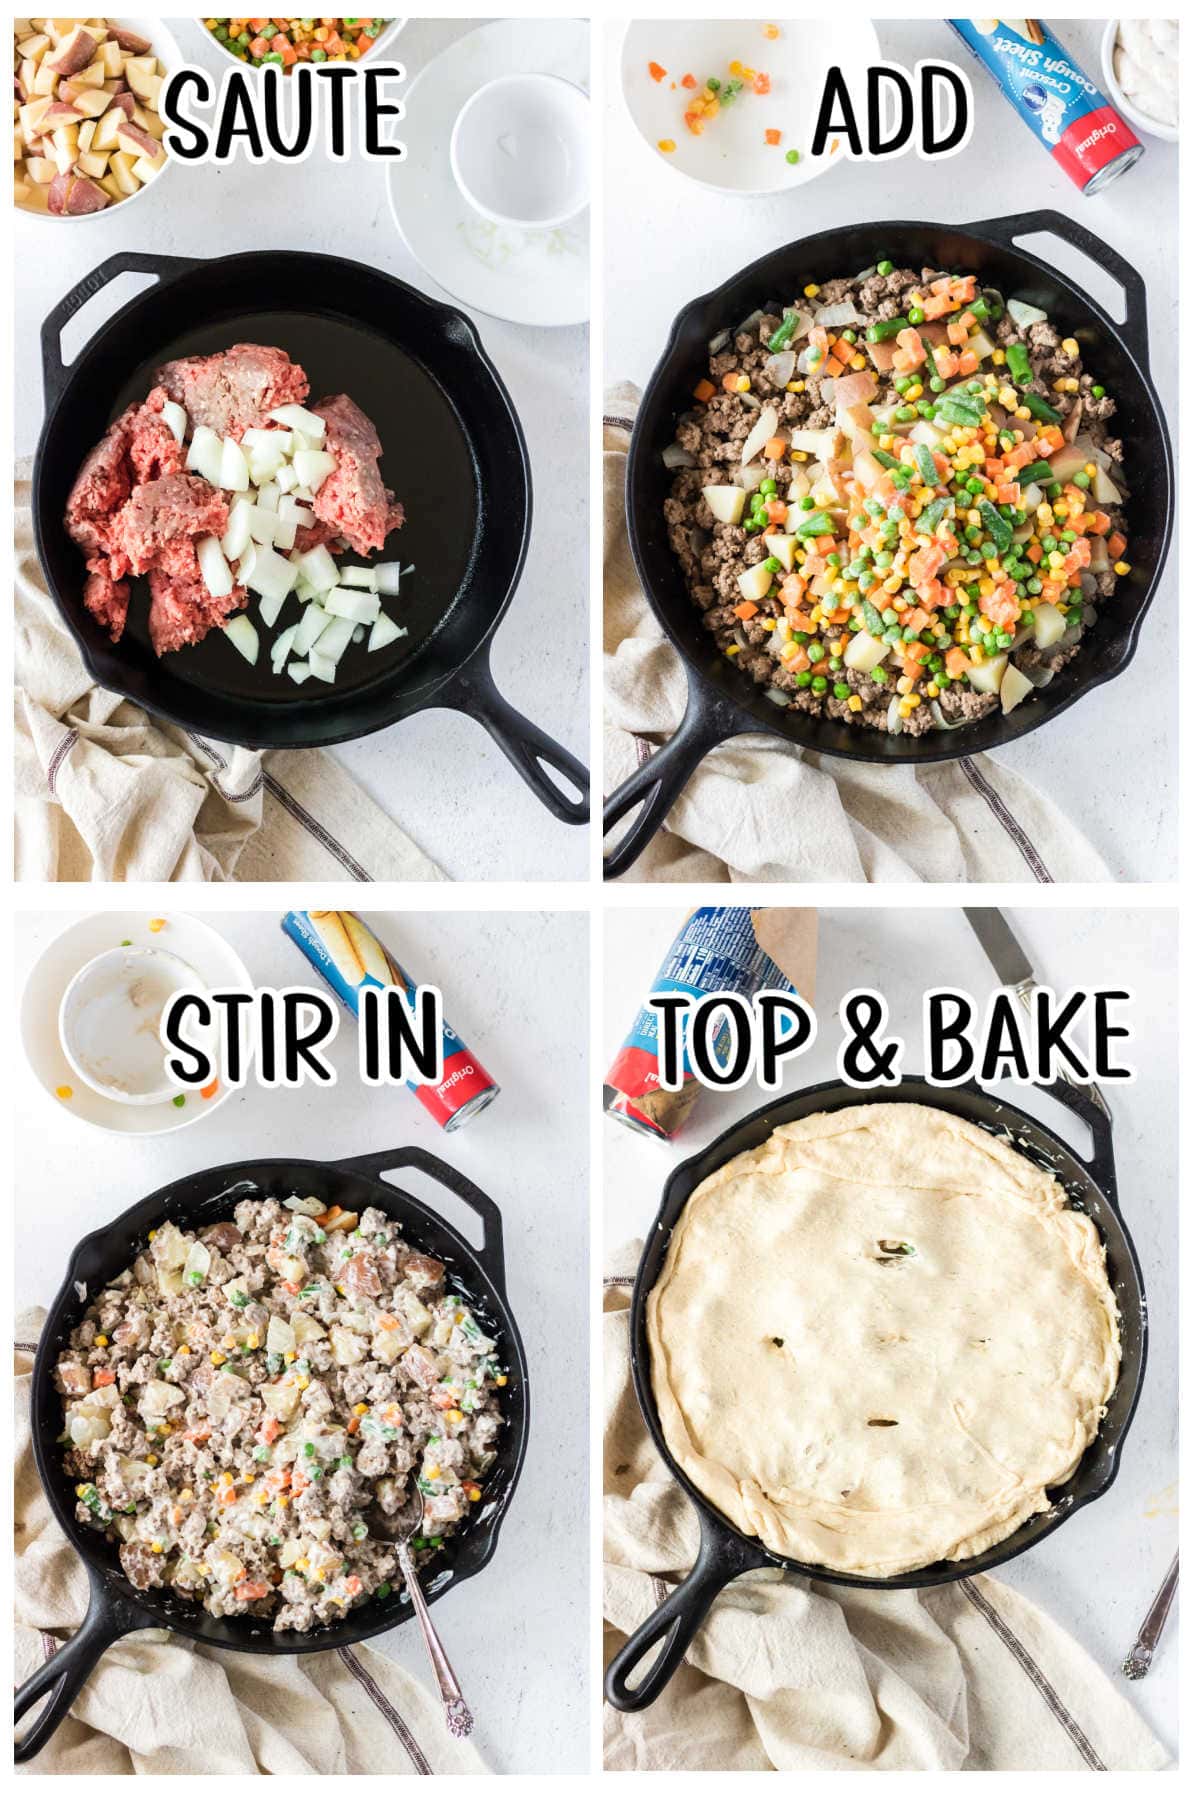 Steps showing how to make this recipe.